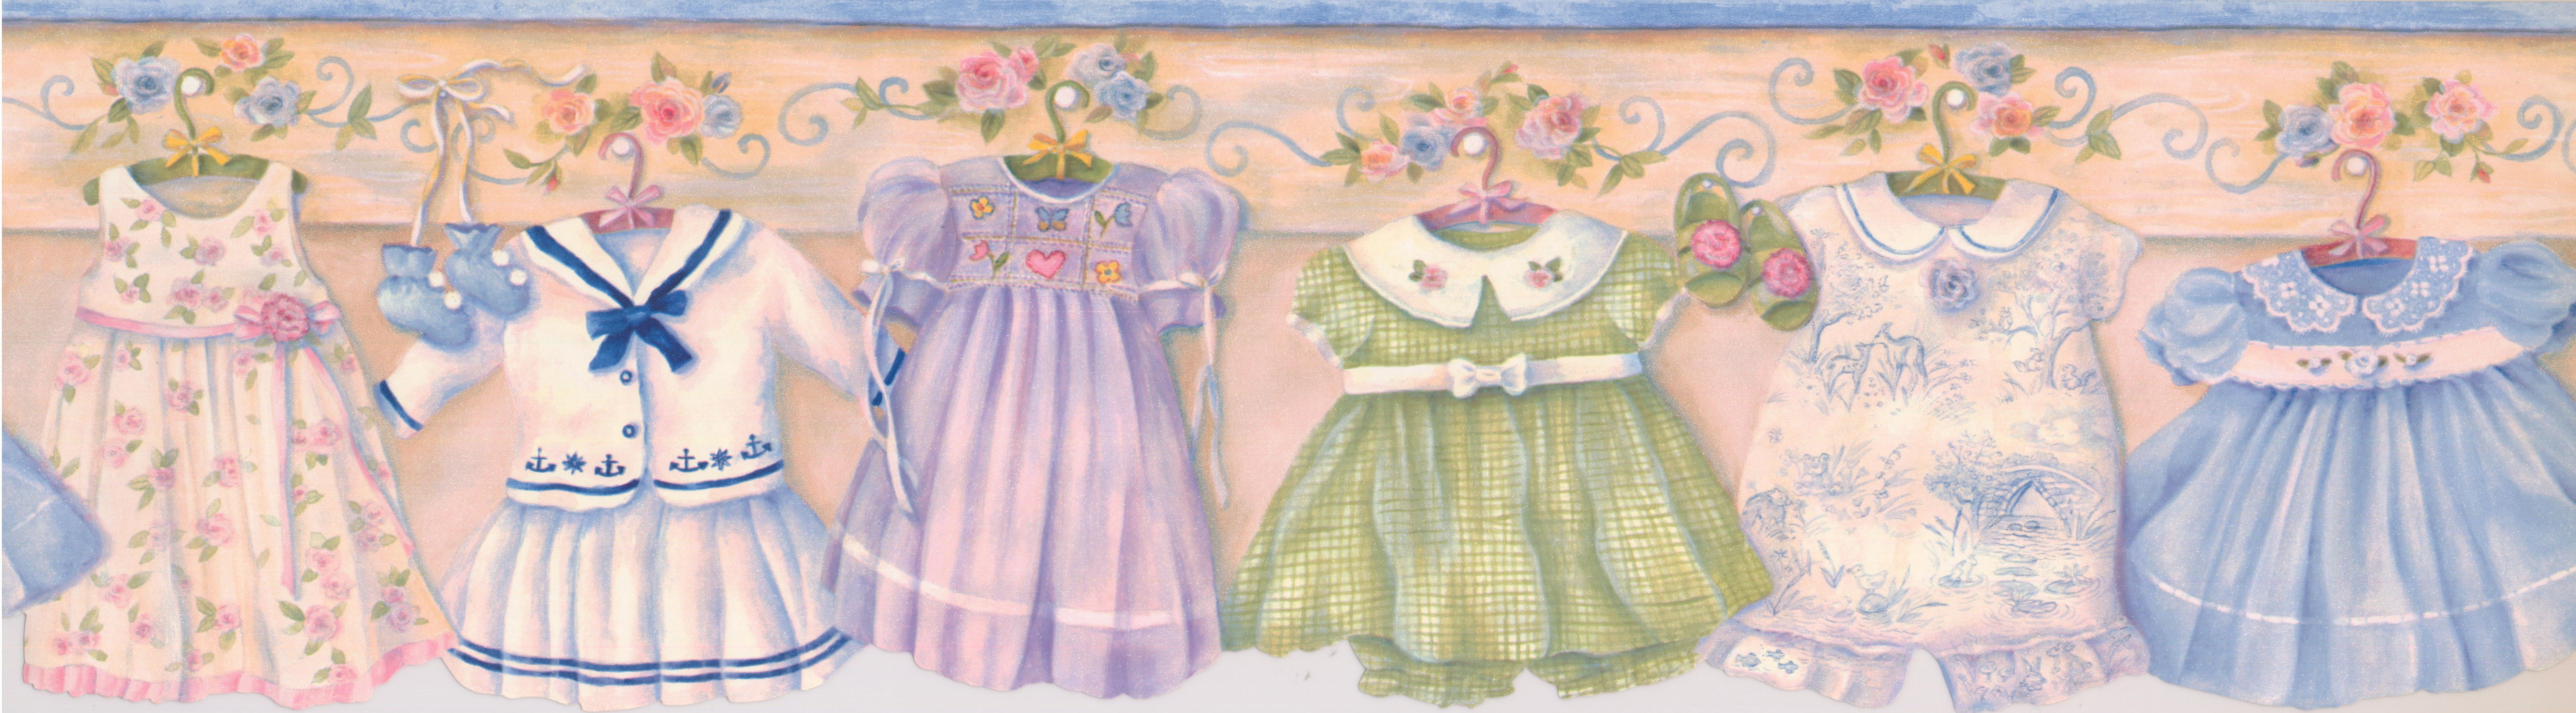 Baby Dresses on Hangers on Honey and Blue Wall Vintage Wallpaper